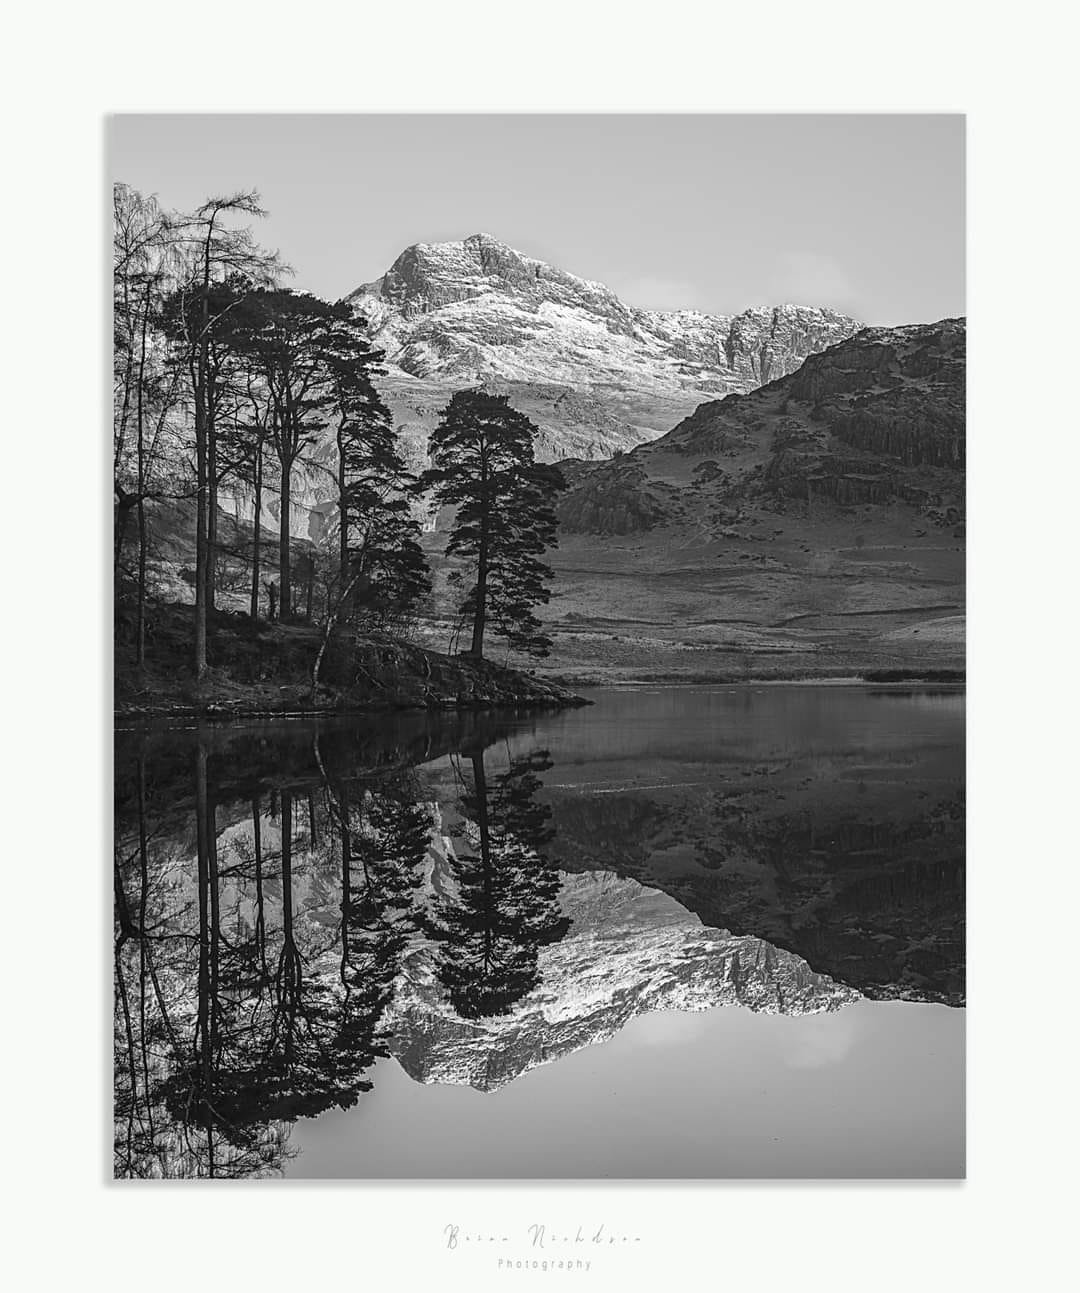 Breathtaking shot by member Brian Nicholson @cyclingbrian68 - it reminds us of the work by Ansel Adams! 

Brian writes, &quot;Another perspective of Blea Tarn.&quot; 🚵

f/11, 1/50th second, ISO 100,  70mm

Want to learn how to take professional-look